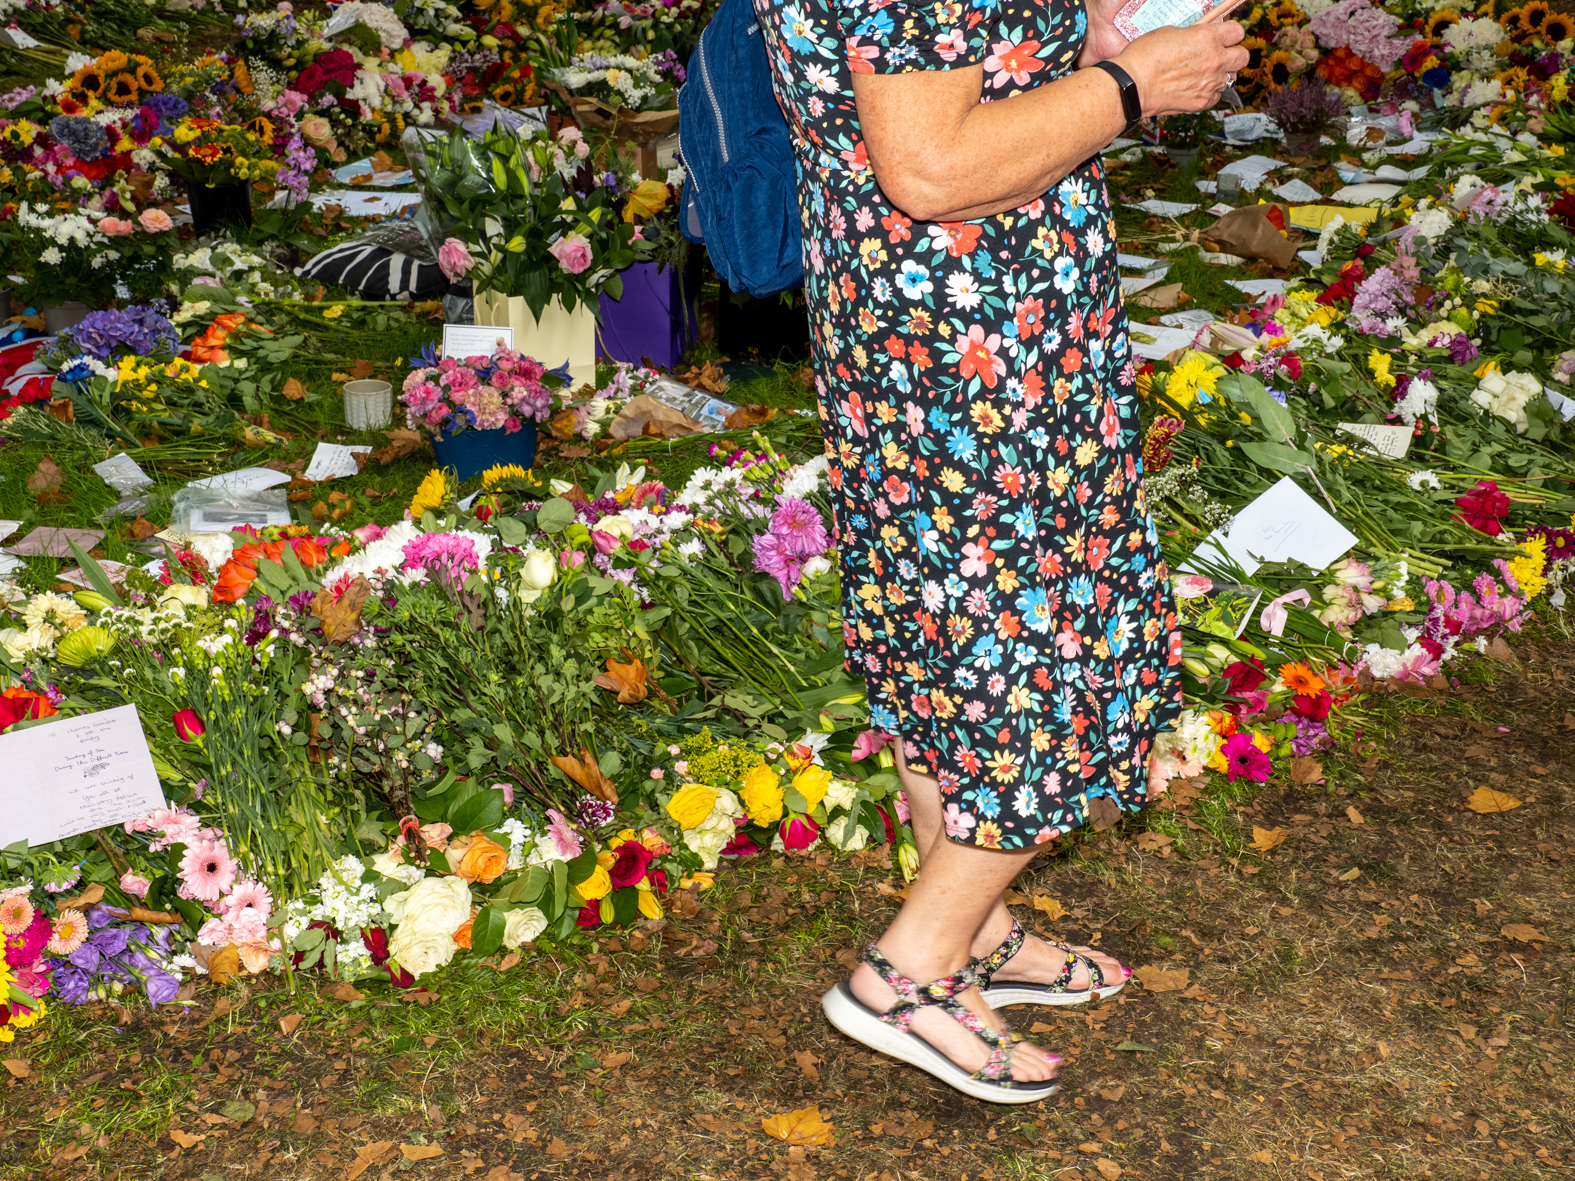 Visitors pay their respects at a temporary memorial garden in Green Park on 12th September in London, United Kingdom following the death of Queen Elizabeth II. Tributes include drawings, cards and floral tributes in their thousands. Plastic wrappings were encouraged to be disposed of responsibly by the public and also removed by volunteers and Royal Parks staff. King Charles III is known to be averse to the use of plastic in this way. (photo by Peter Dench/Getty Images)